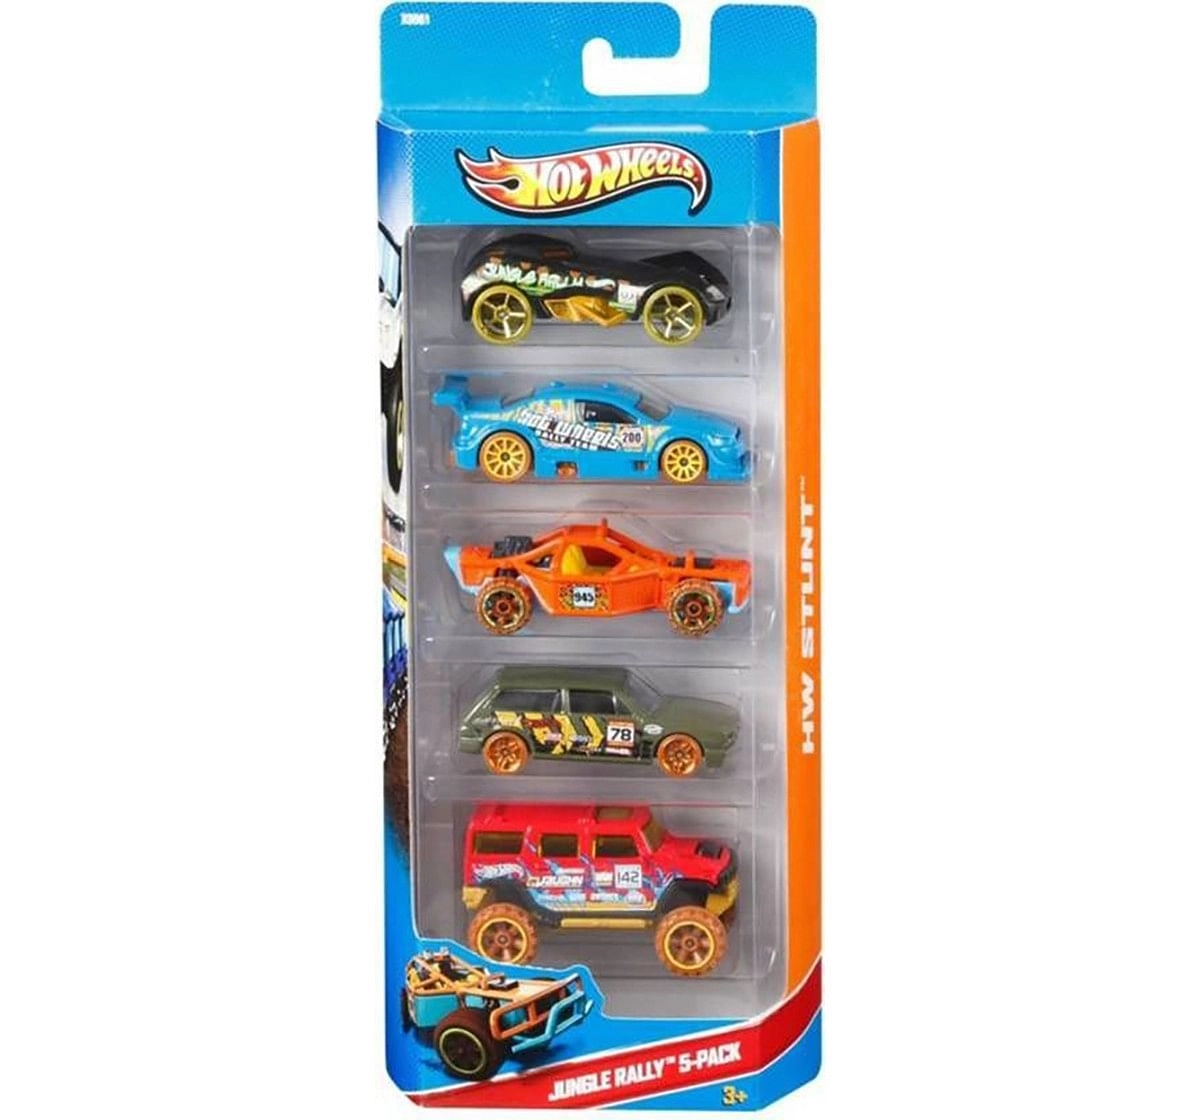 Hot Wheels Die Cast Cars Pack of 5 Vehicles for Kids, 3Y+, Assorted